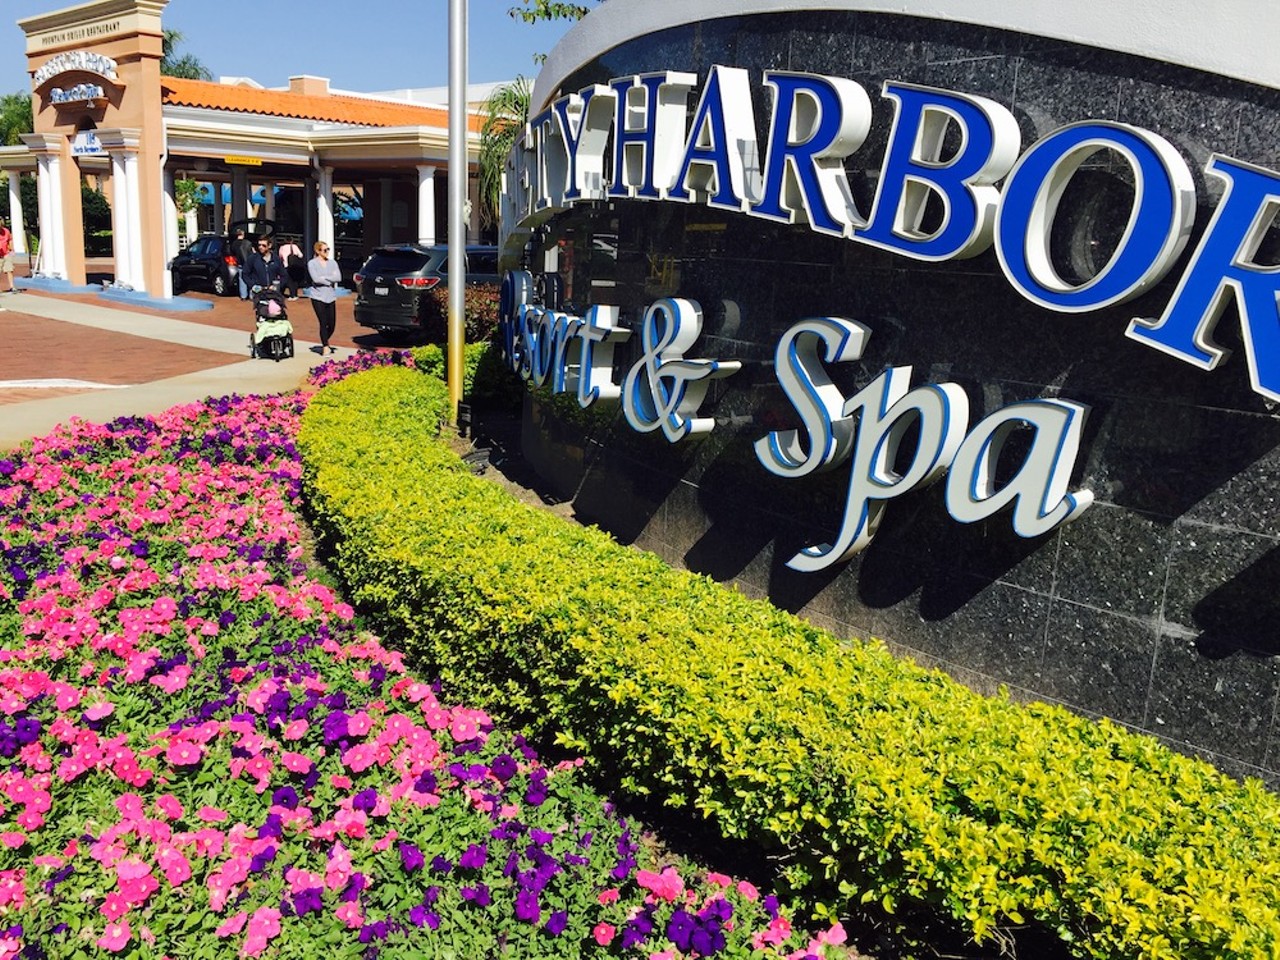 Safety Harbor Resort & Spa
105 N. Bayshore Drive, Safety Harbor.
Brunch it up while taking your pick from a midday assortment of soups and salads, entrees and sweets.
Photo via David Warner